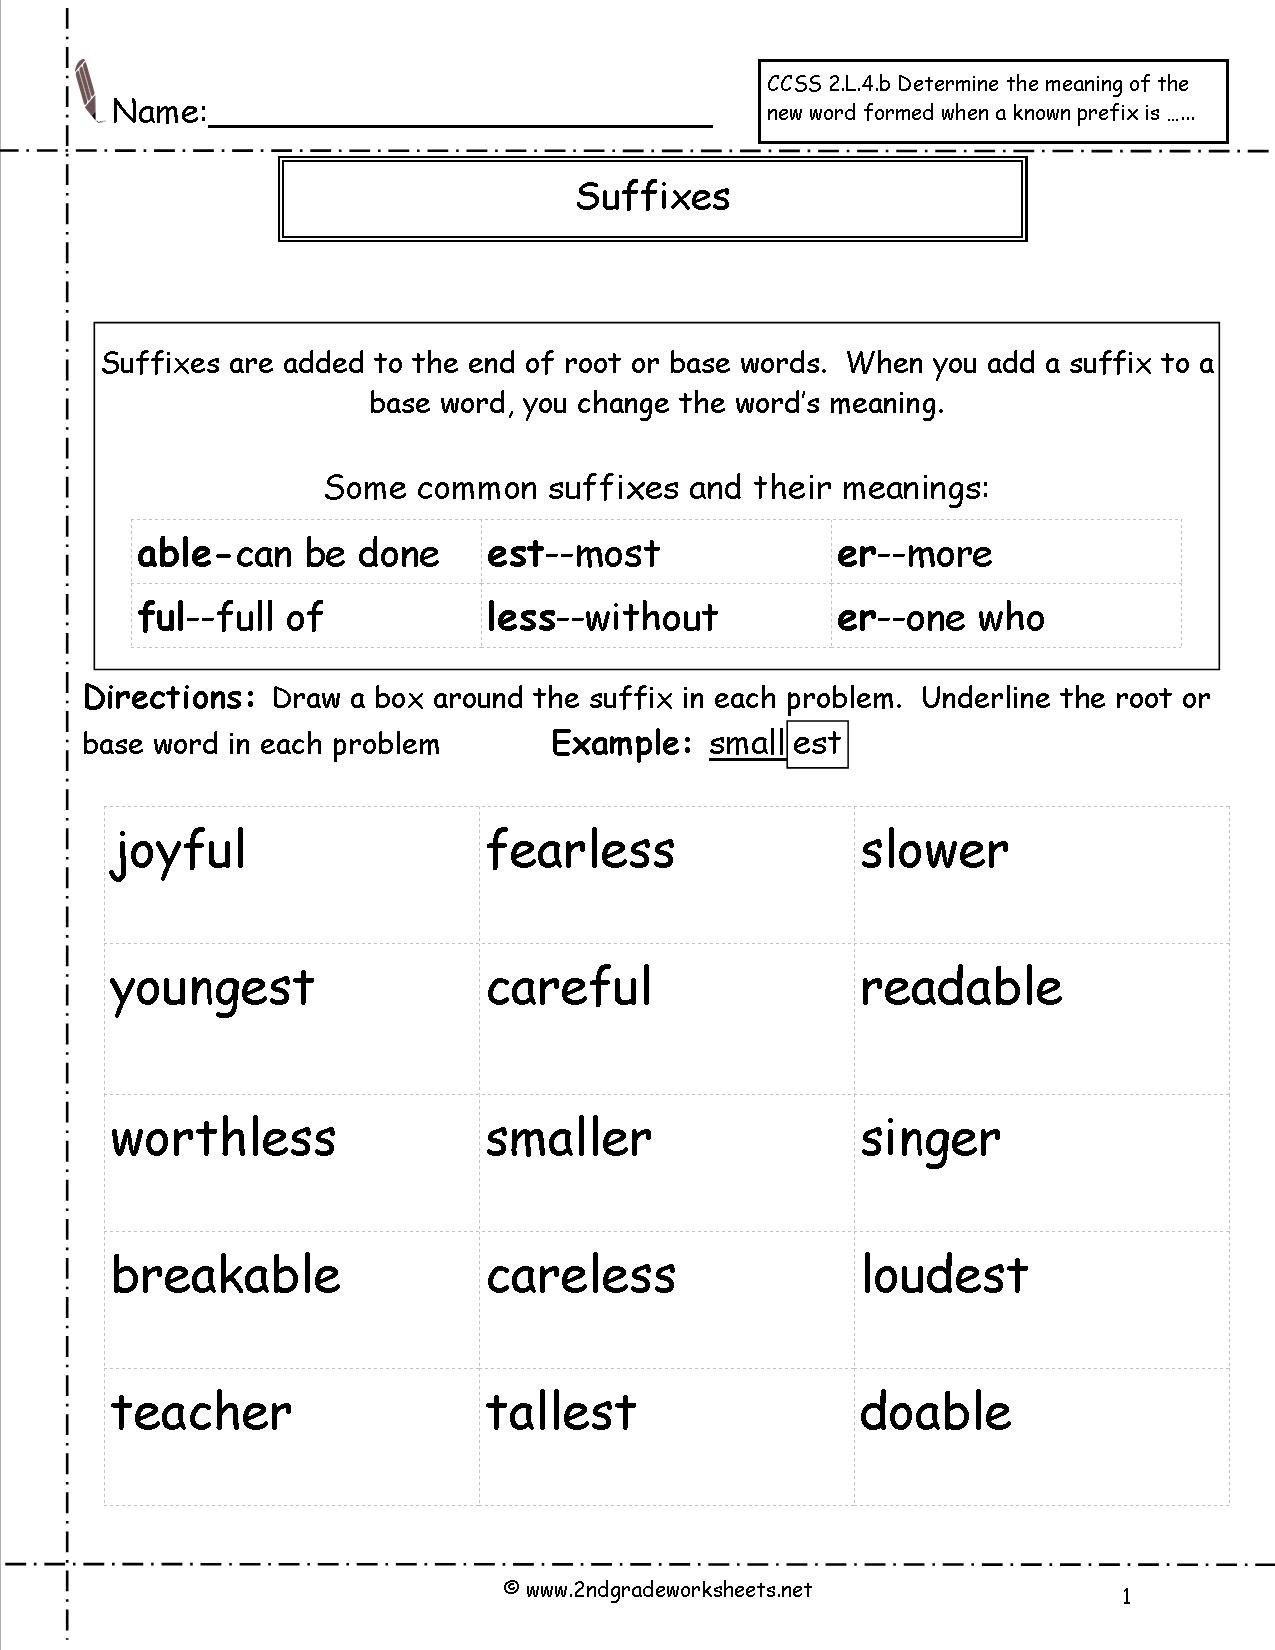 10 Best Images of ROOT-WORDS 4th Grade Worksheets - Prefix and Suffix